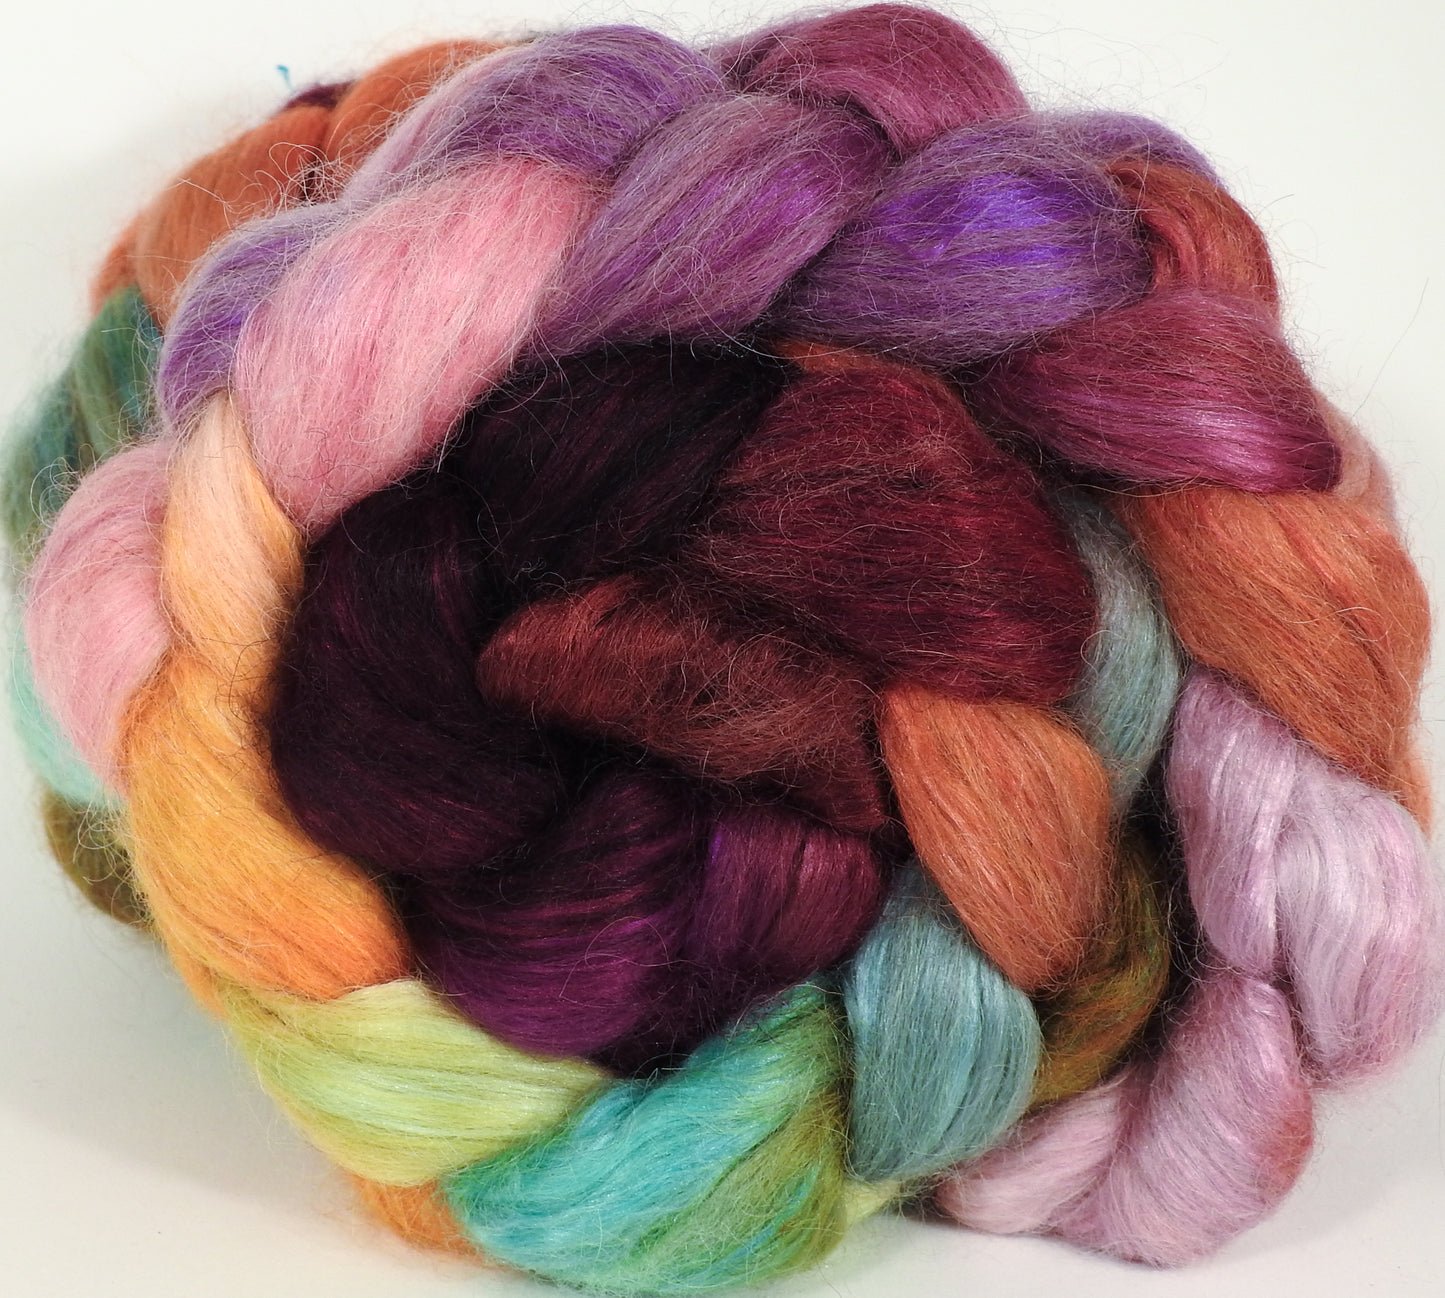 Hand-dyed wensleydale/ mulberry silk roving ( 65/35) -The Red Queen - Inglenook Fibers